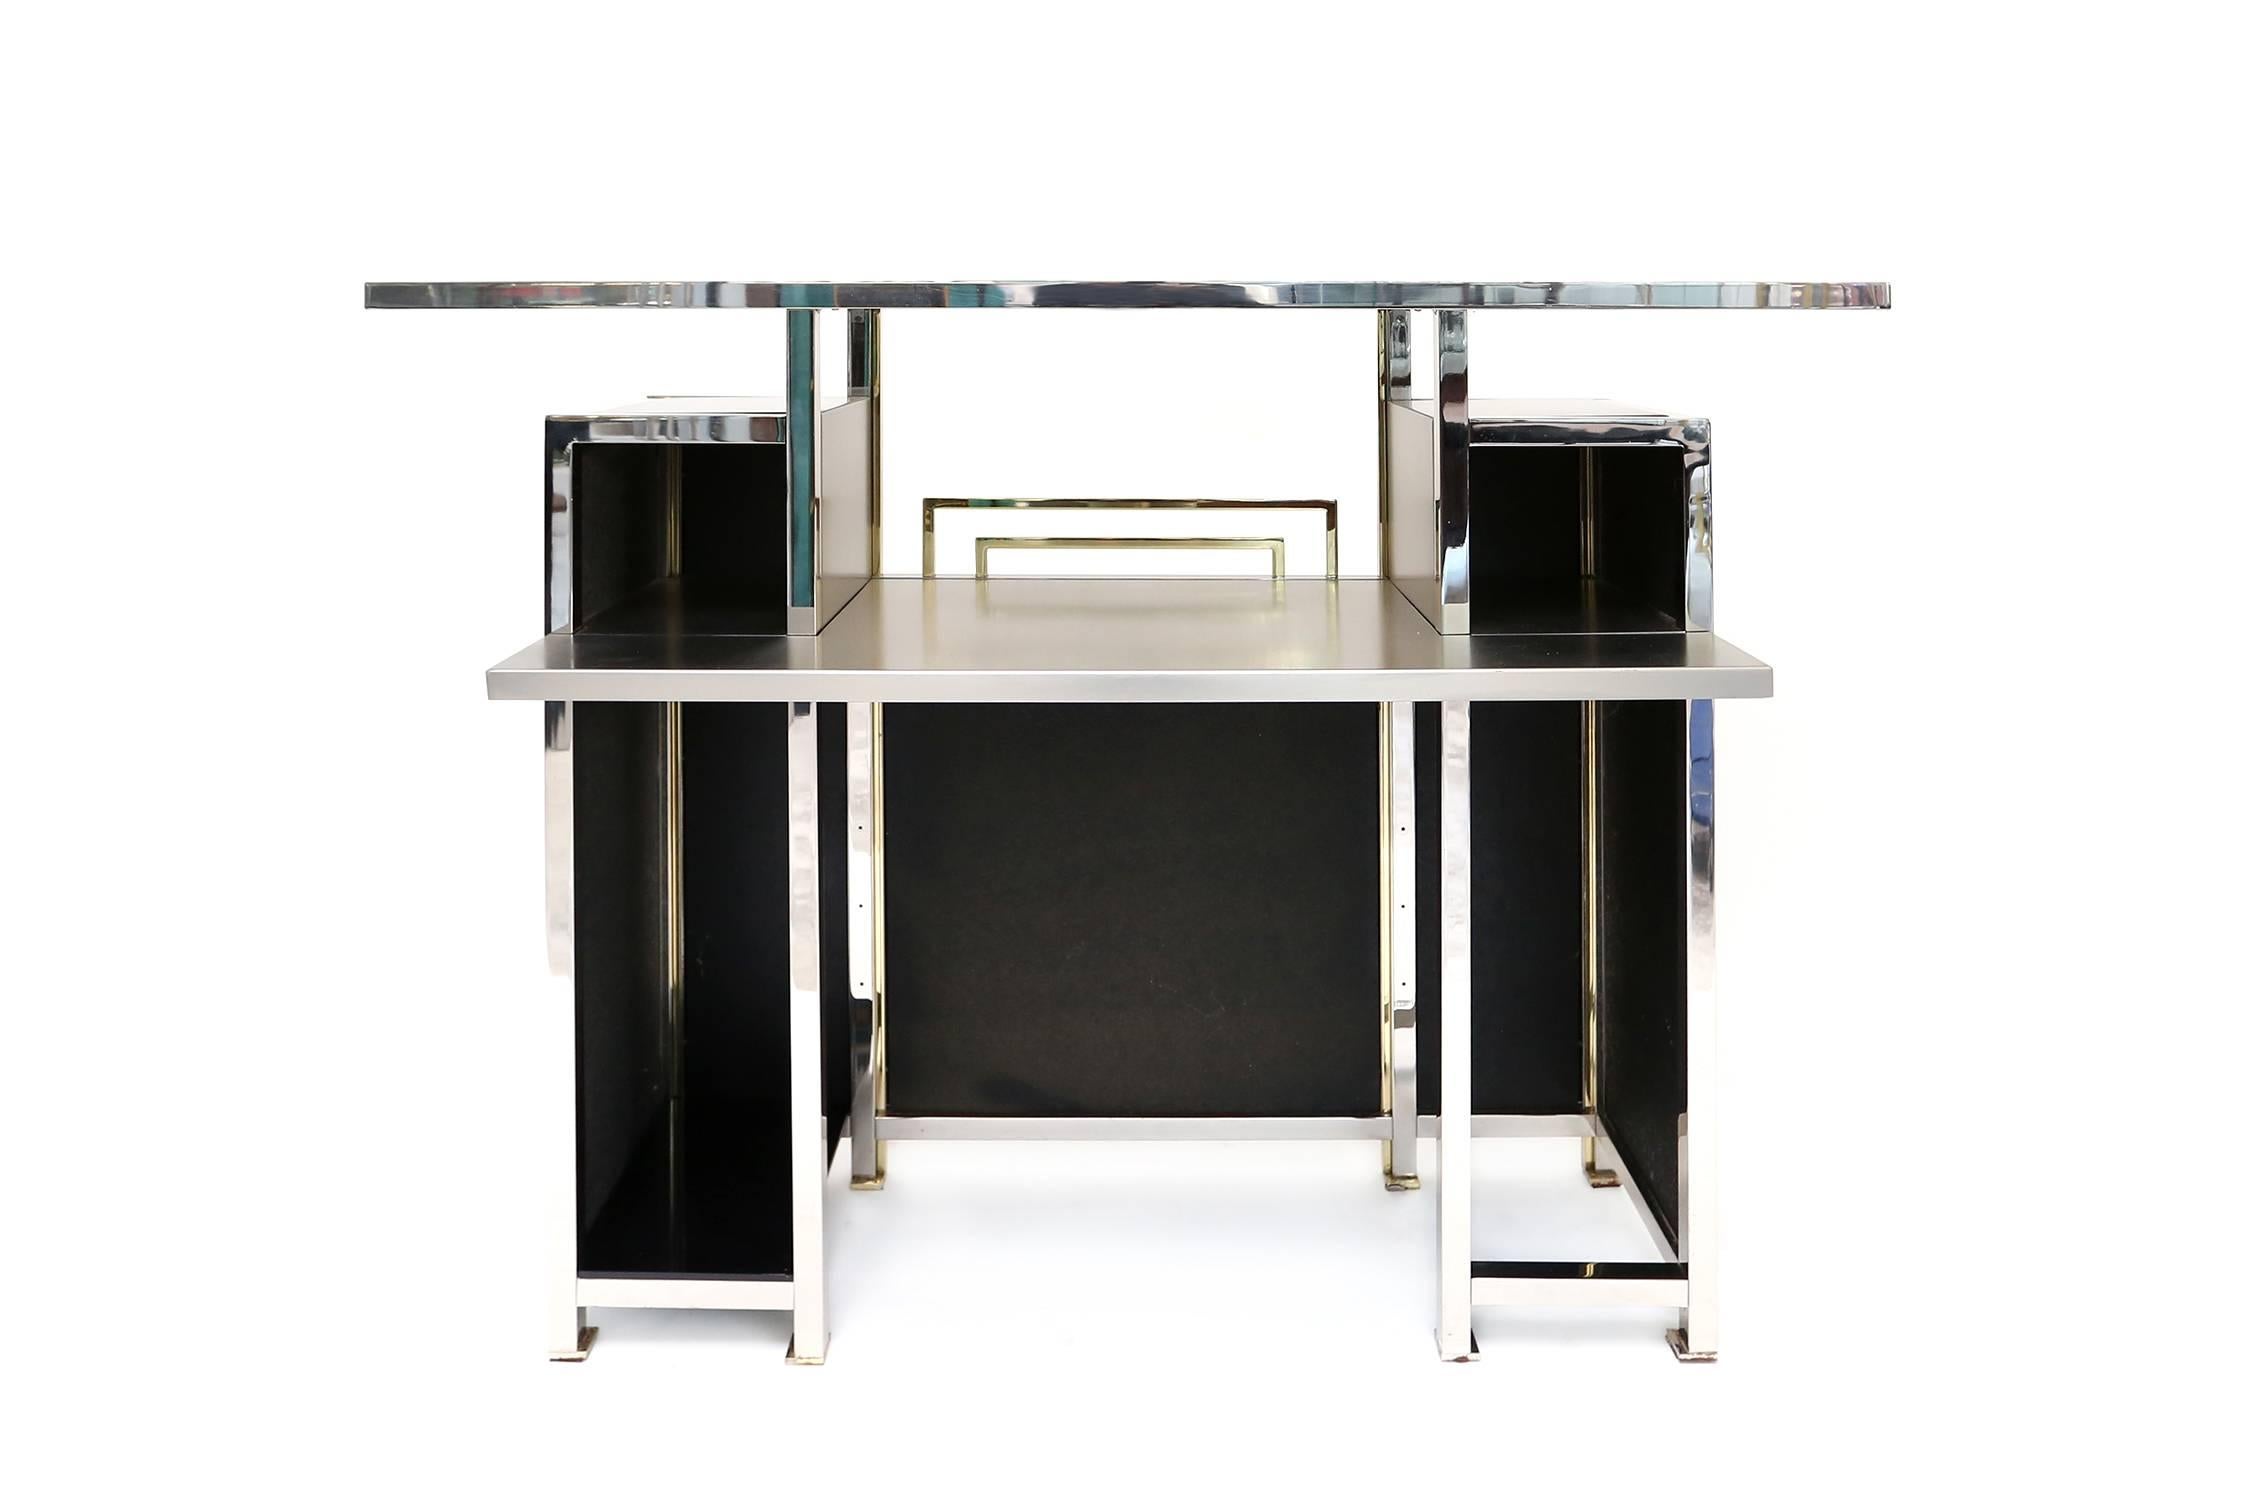 Chrome  brass  stainless steel bar piece by Maison Jansen an exquisite and very rare item. A possible match with the Maison Jansen bar stools. Measures: L 150 cm, D 50 cm, H 78 cm.